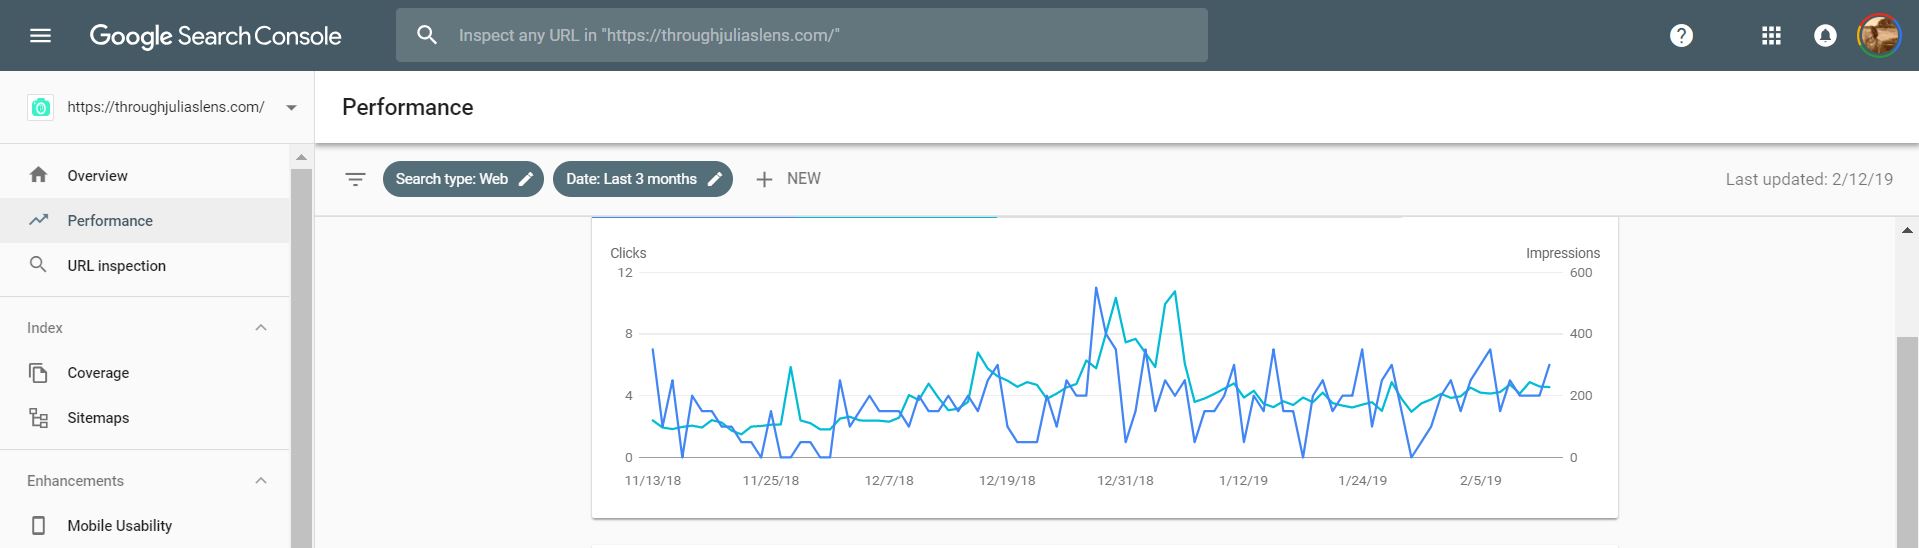 Google Search Console tips